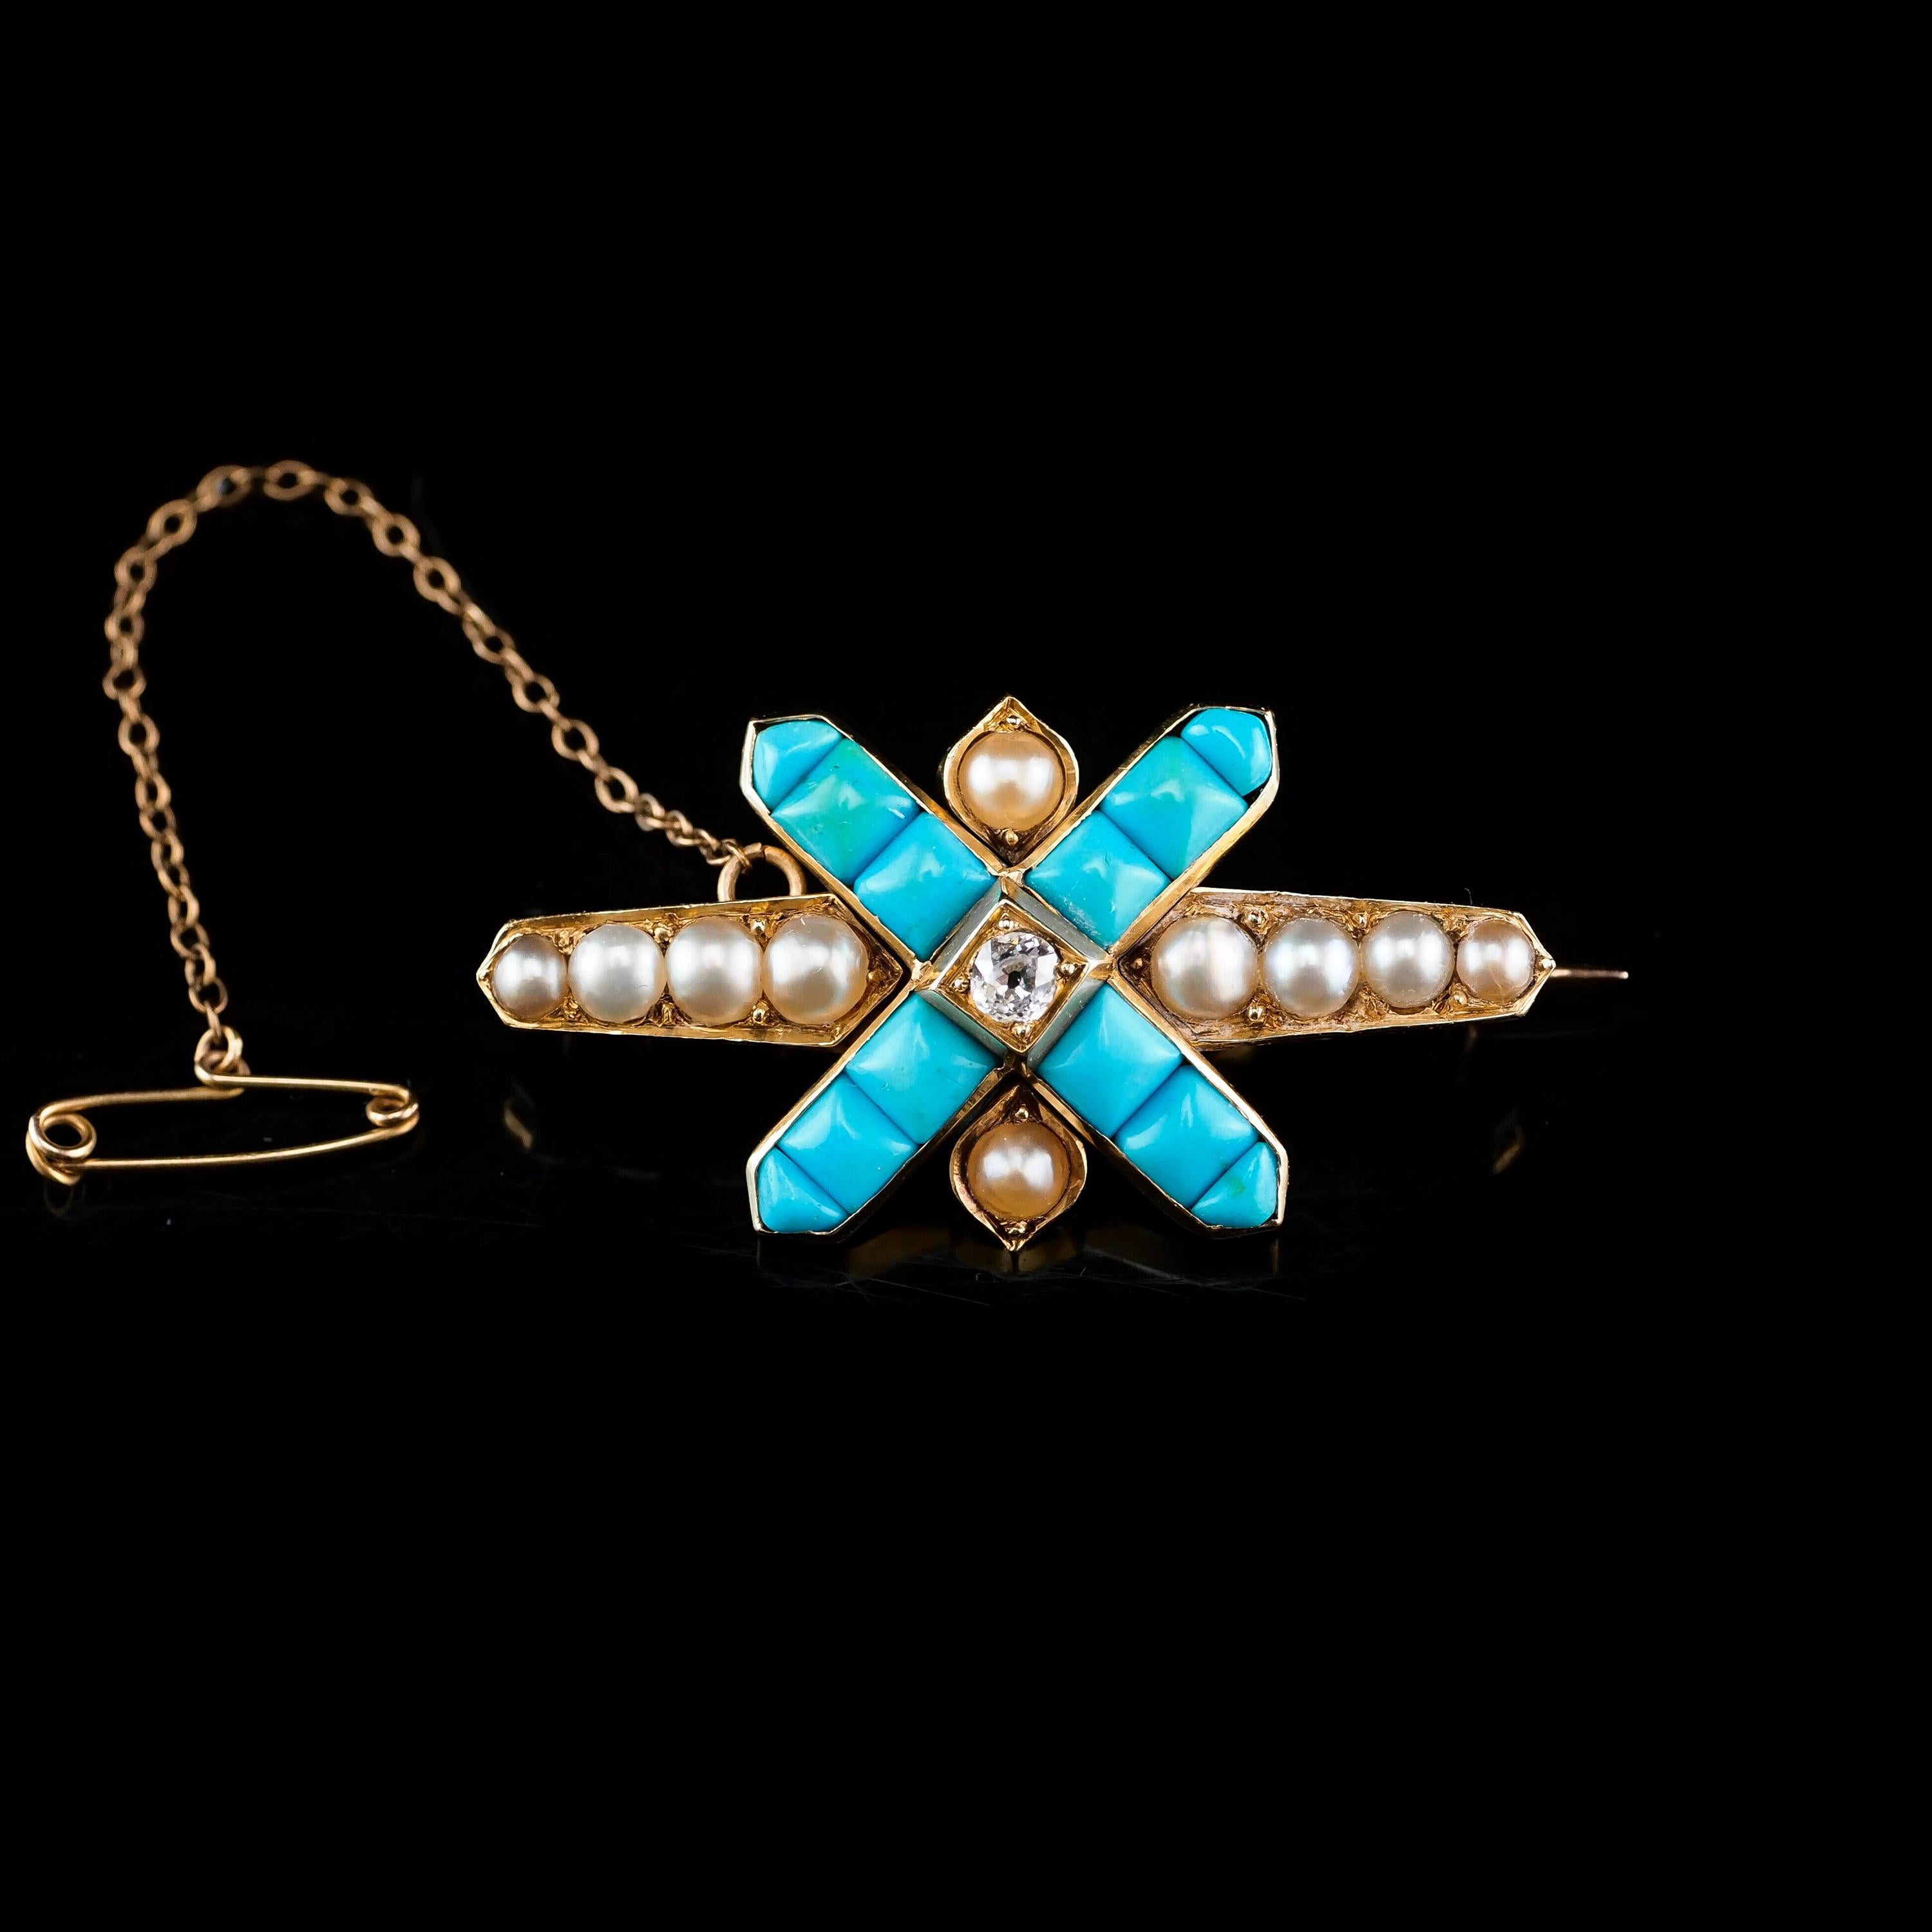 Antique Victorian 14k Gold Turquoise, Pearl & Diamond Brooch, circa 1880 For Sale 3